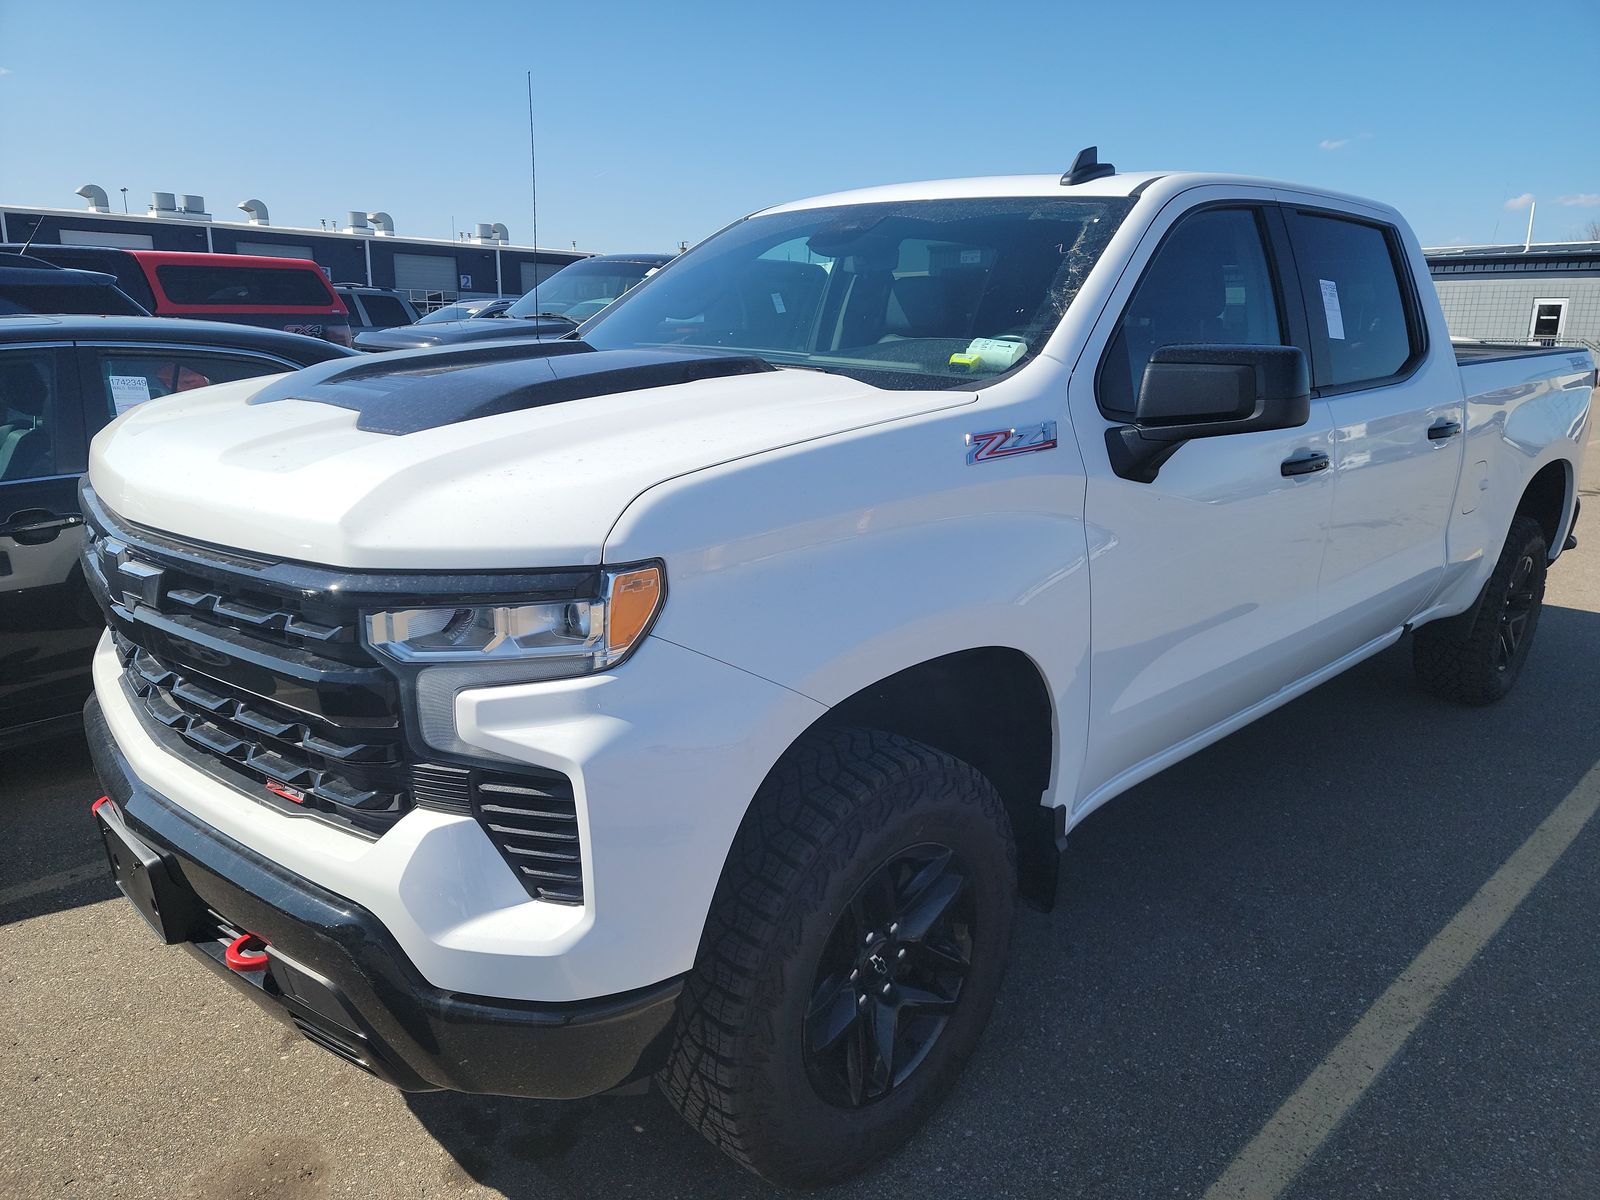 Used 2022 Chevrolet Silverado 1500 LT Trail Boss with VIN 3GCUDFED1NG627765 for sale in Minneapolis, Minnesota